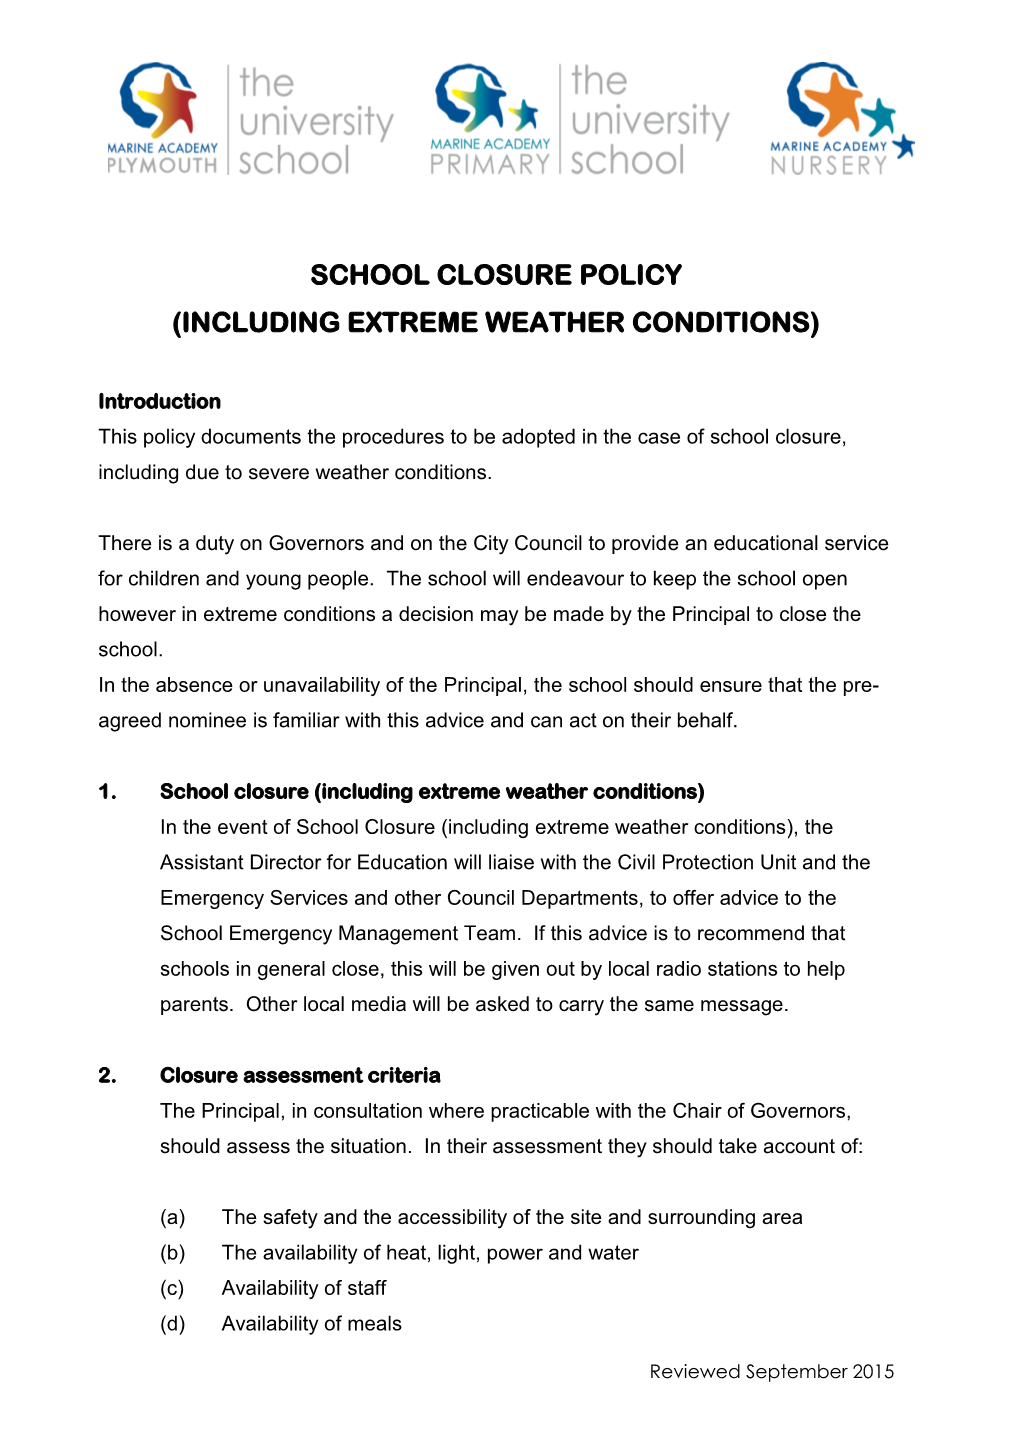 School Closure Policy (Including Extreme Weather Conditions)